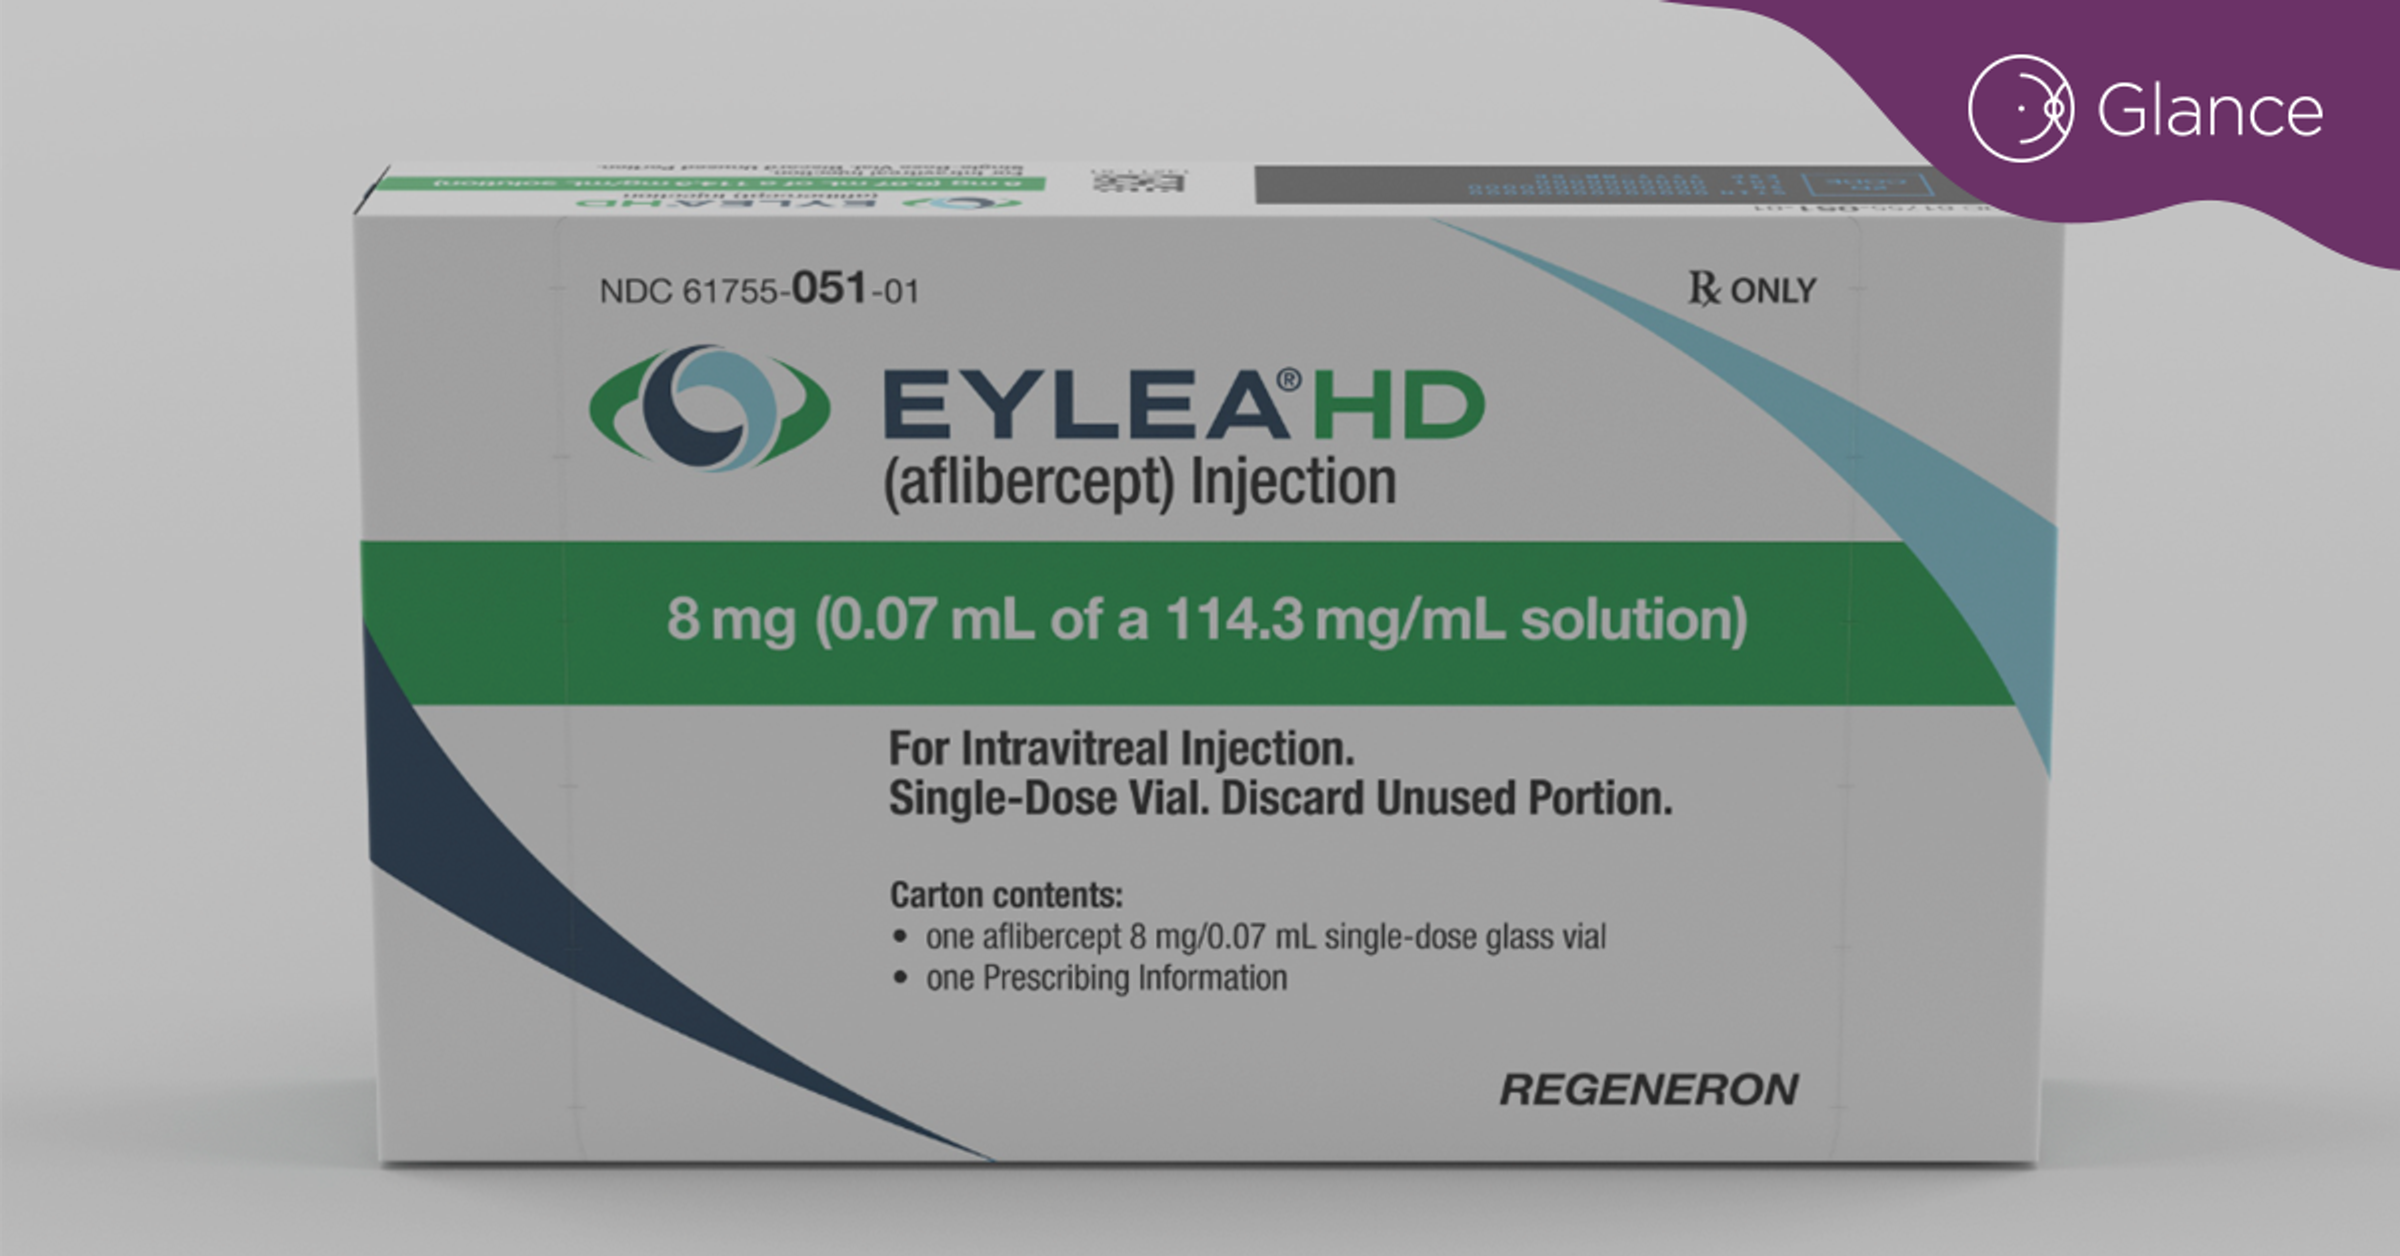 New data on Eylea HD supports prolonged dosing for wet AMD